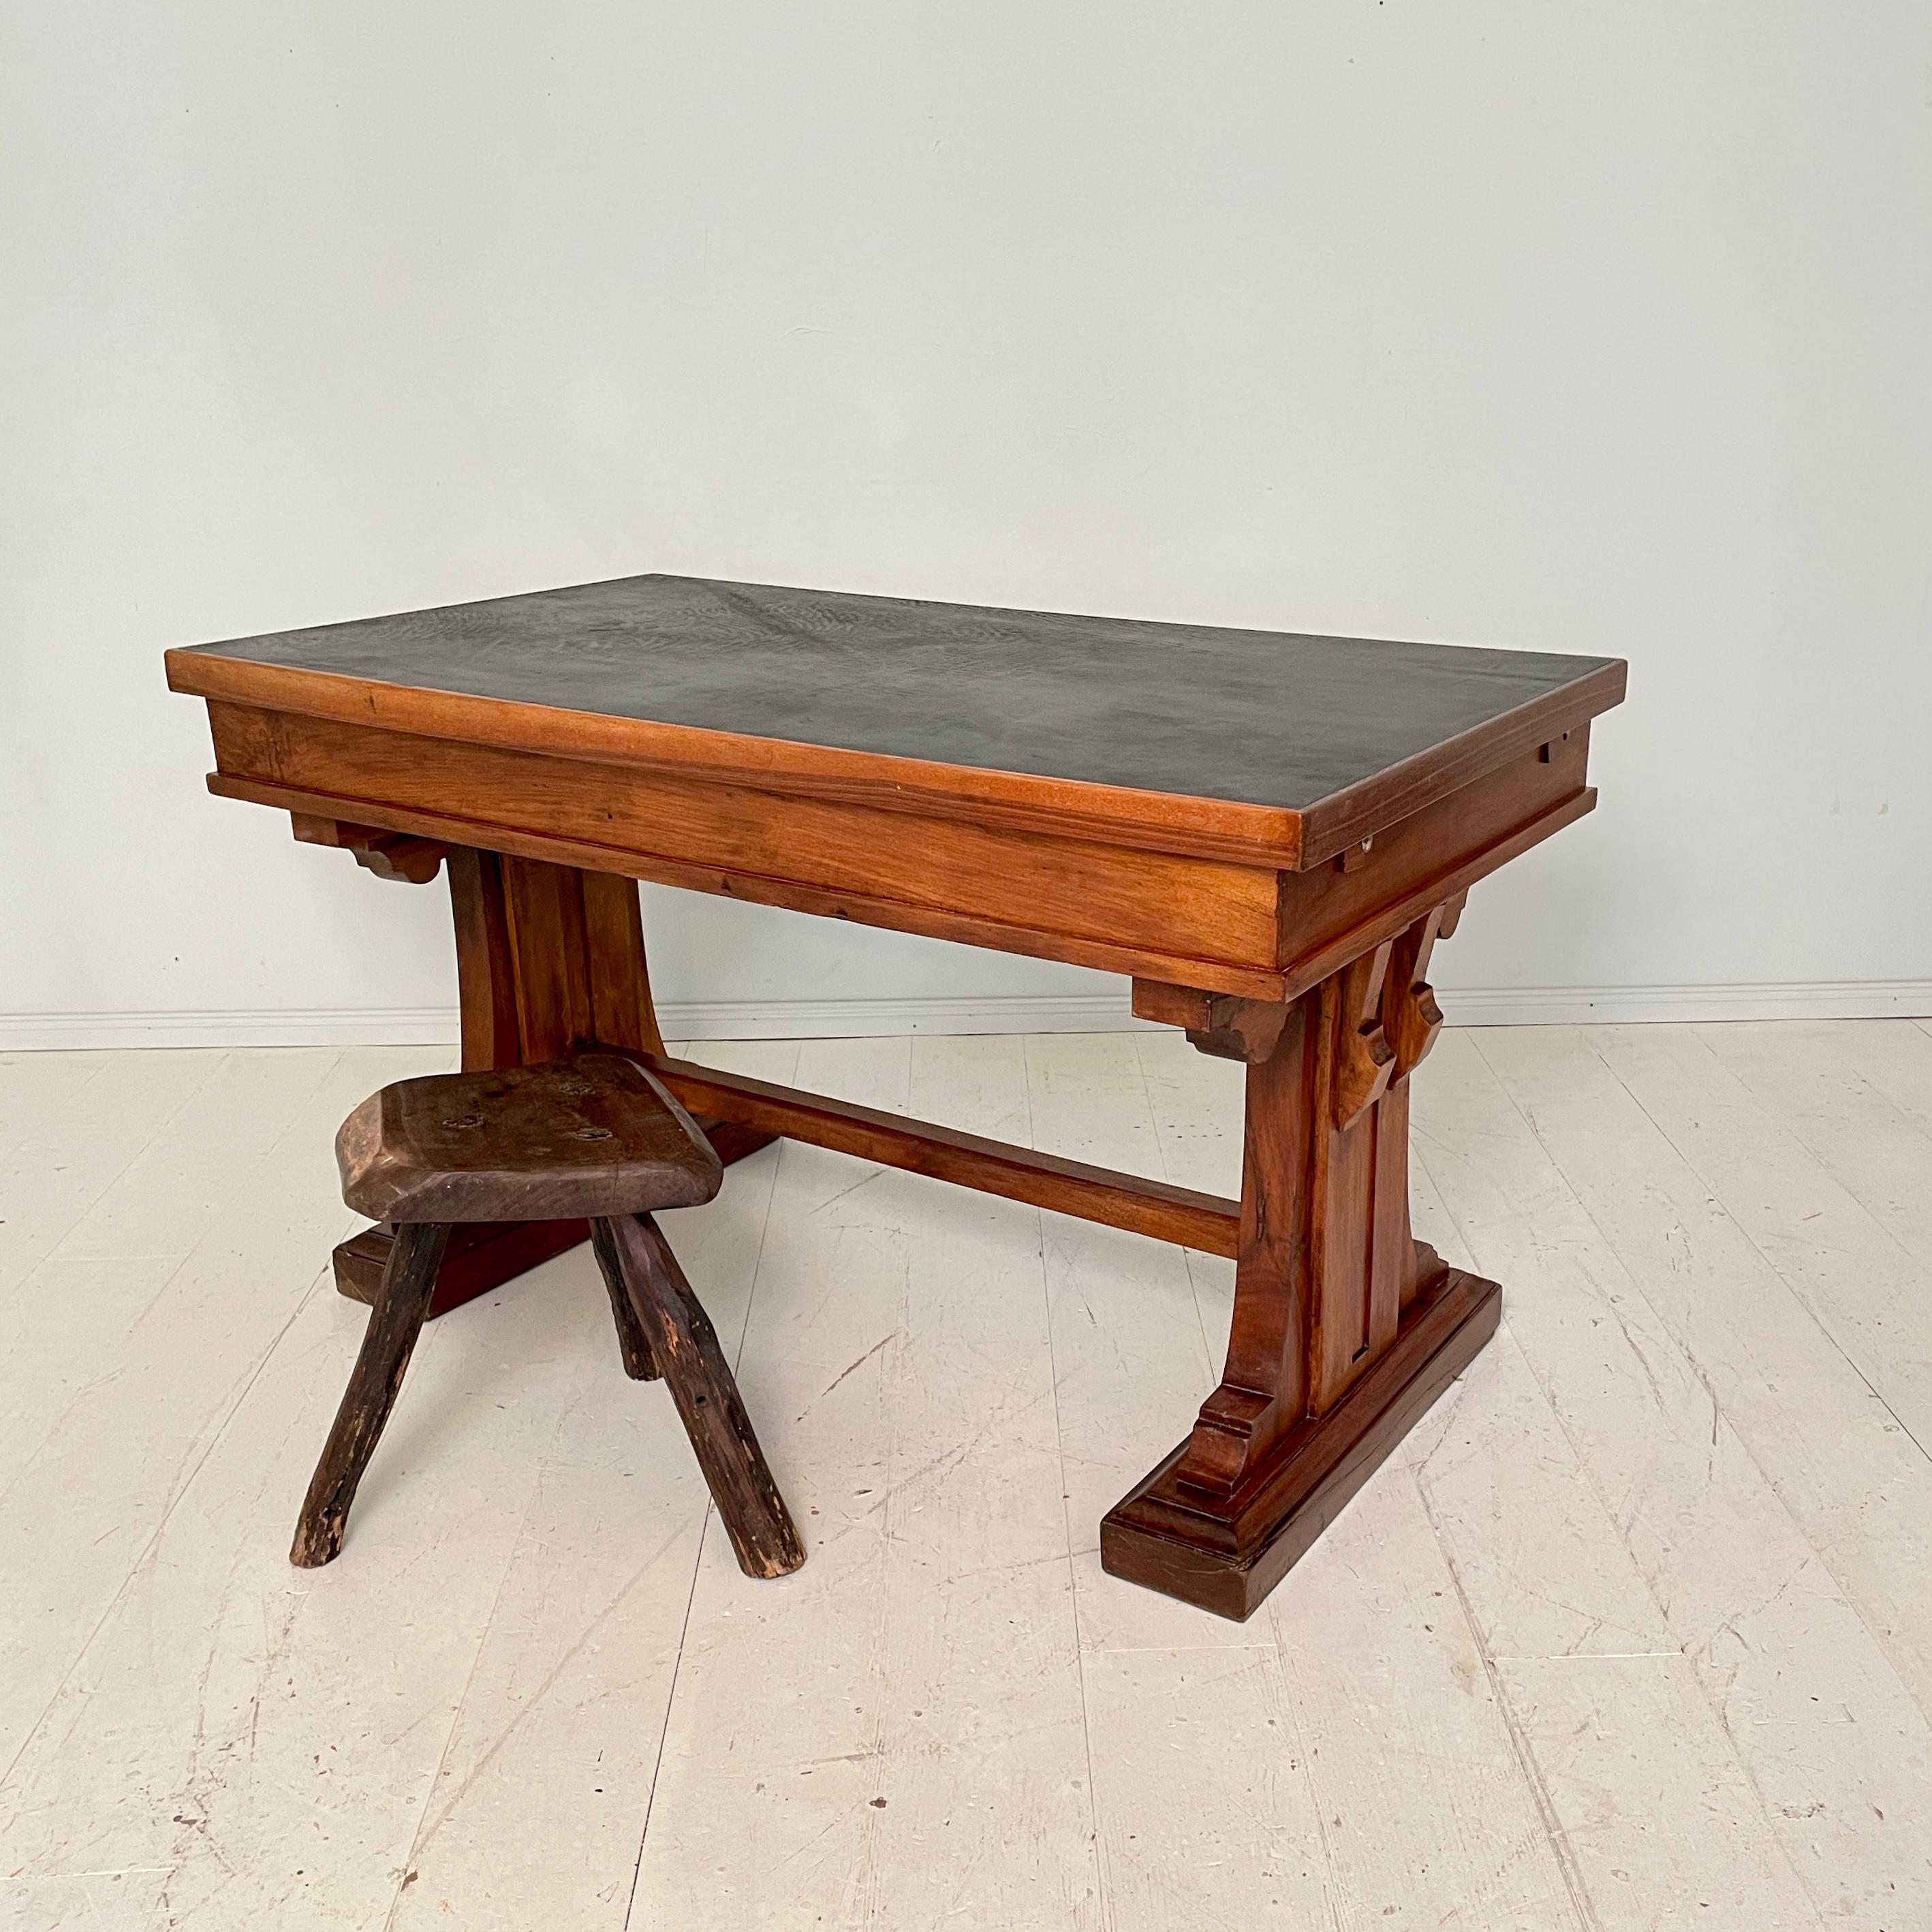 Italian Art Deco Desk or Writing Table in Walnut and Black Leather Top, 1920s 9